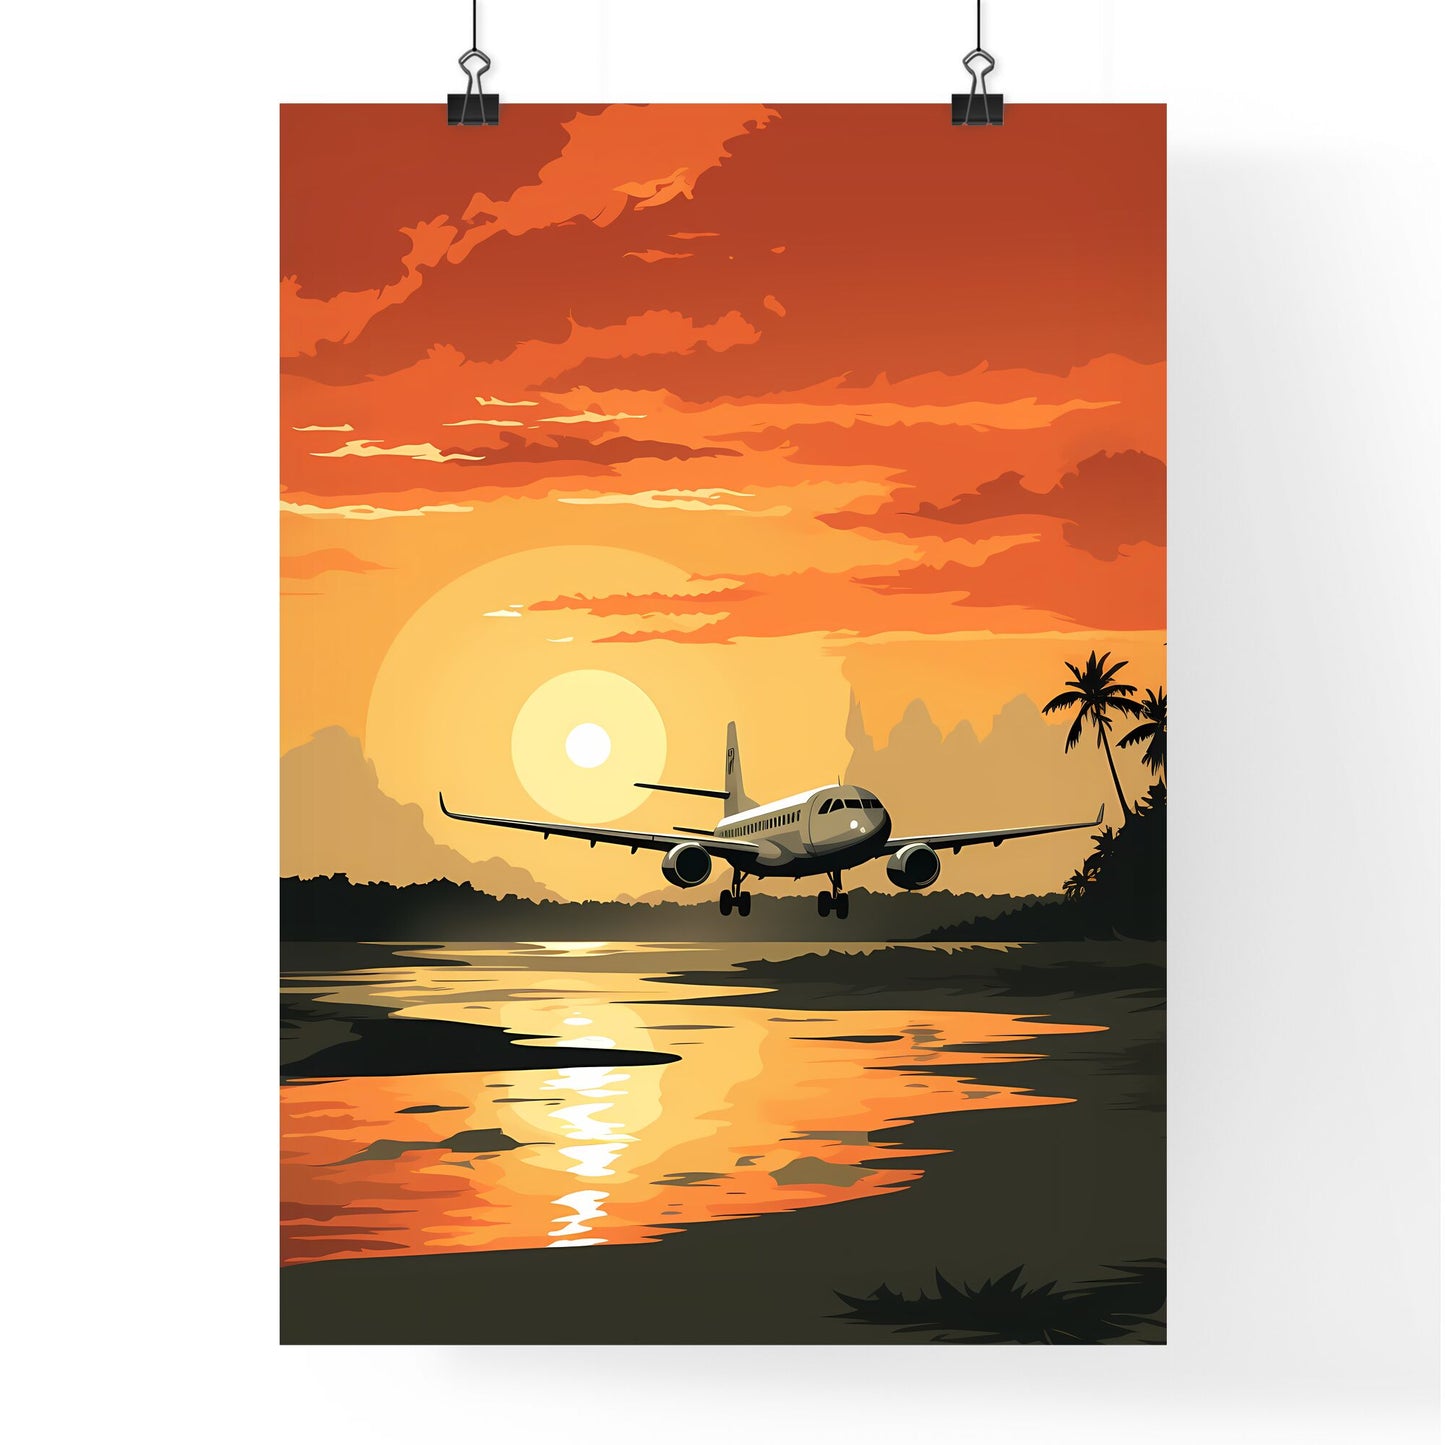 Travel abroad illustration - Art print of an airplane taking off at sunset Default Title